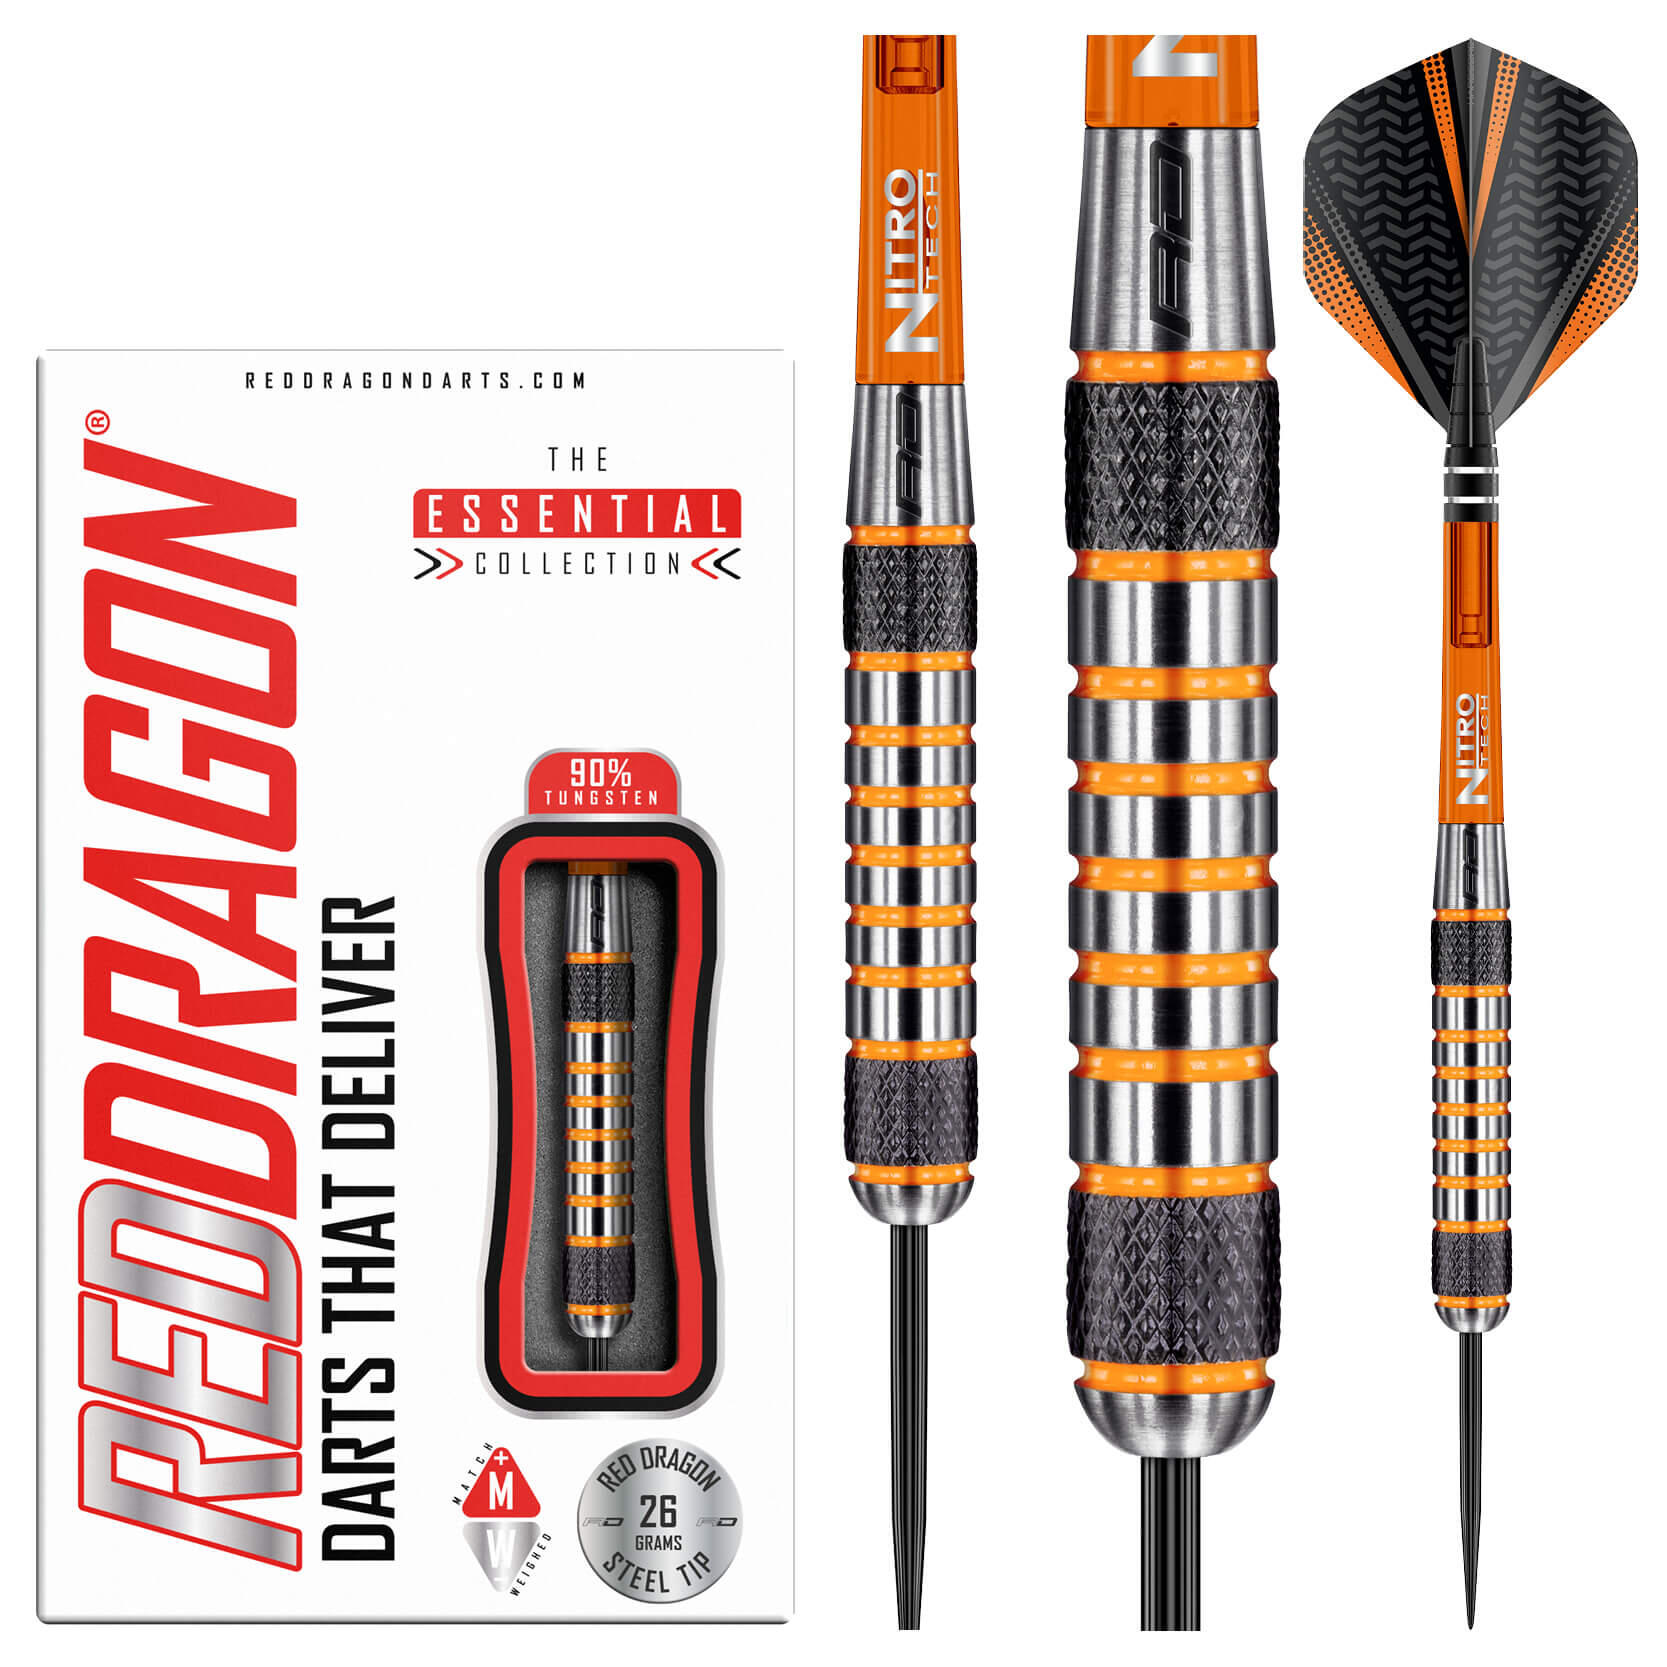 Amberjack 7: 26g Tungsten Darts Set with Flights and Stems 1/5